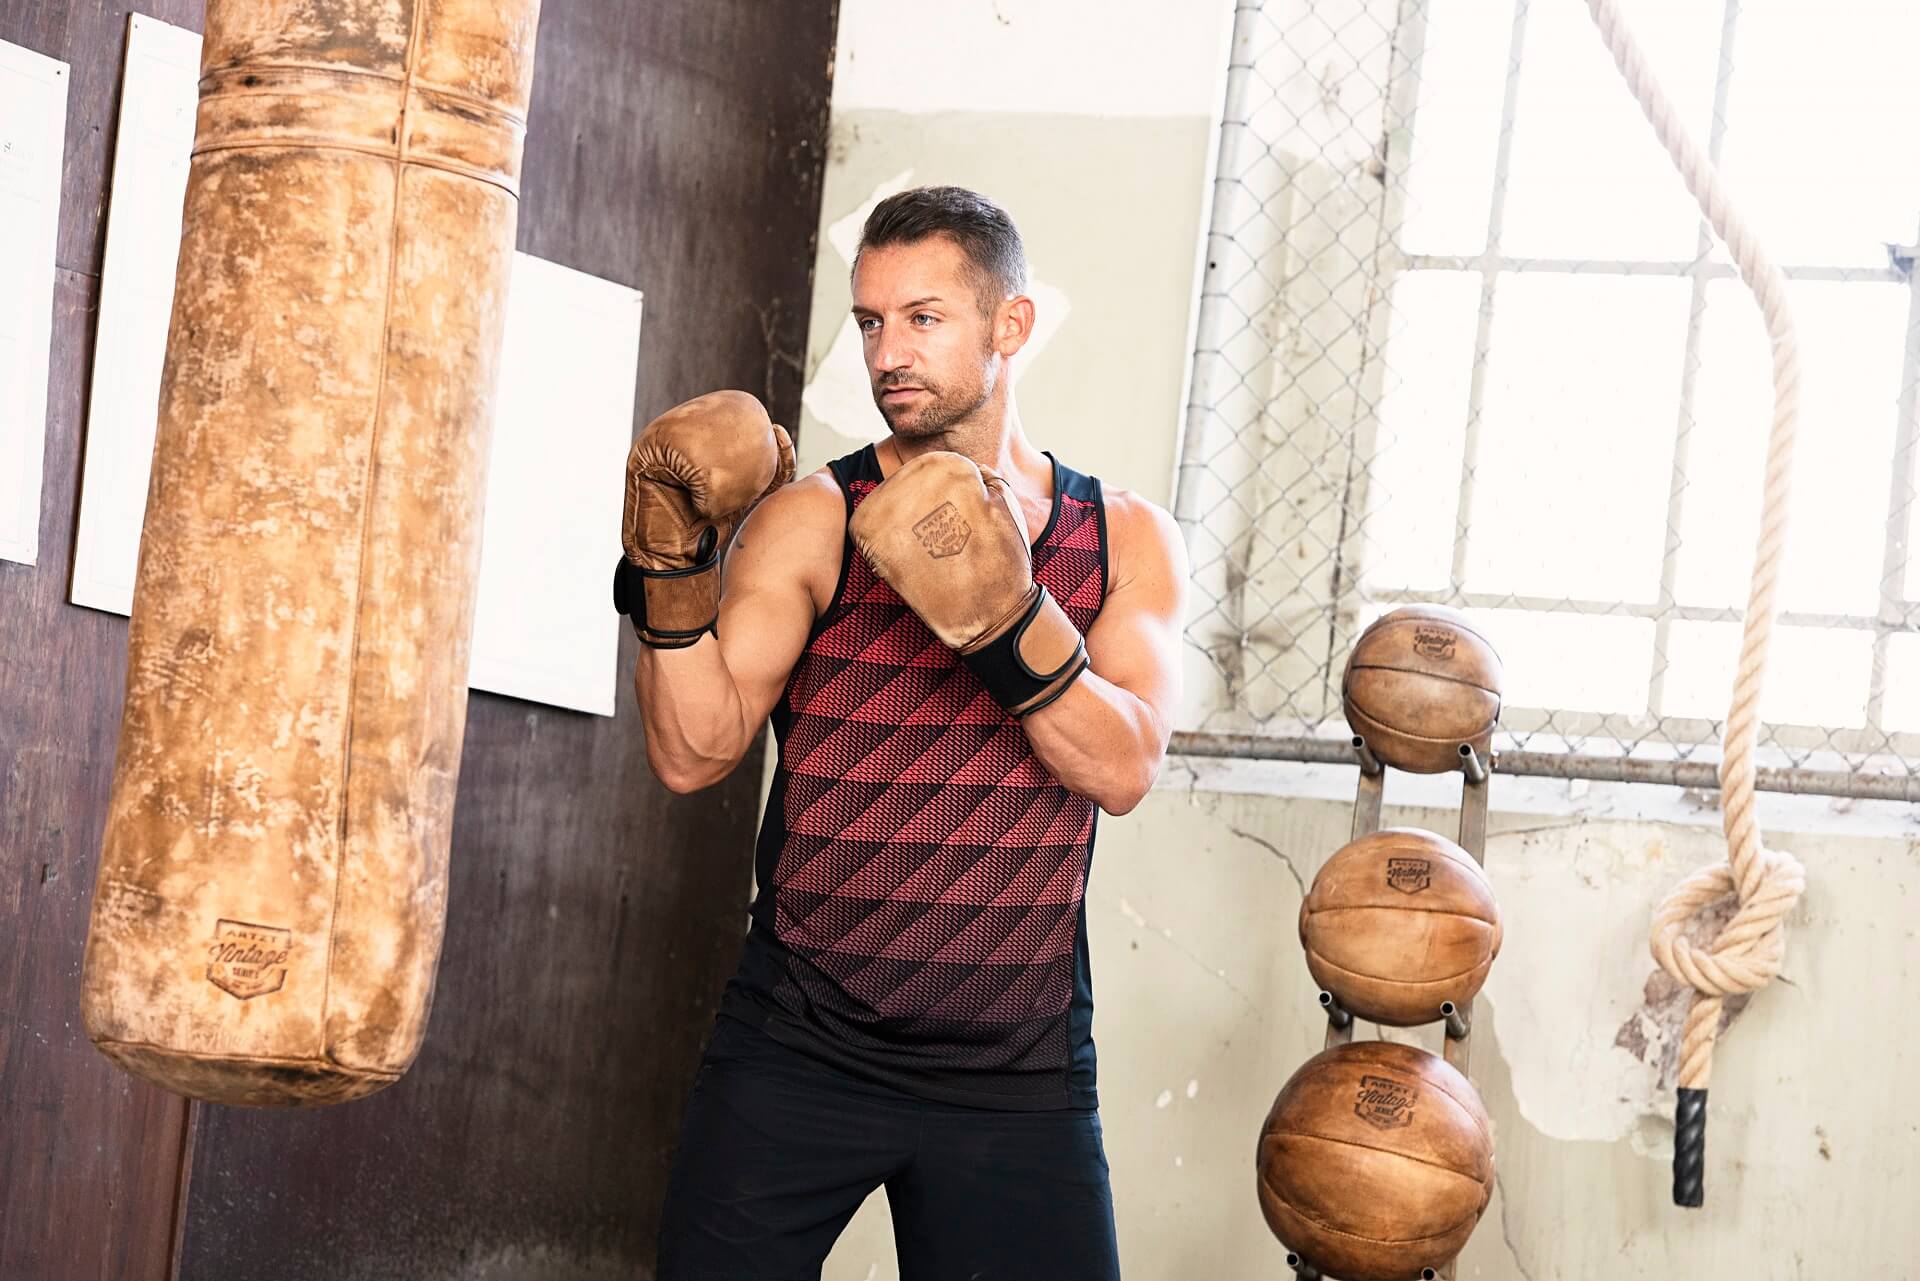 Load video: Personal trainer Arne Derricks shows how to train endurance and strength with boxing.